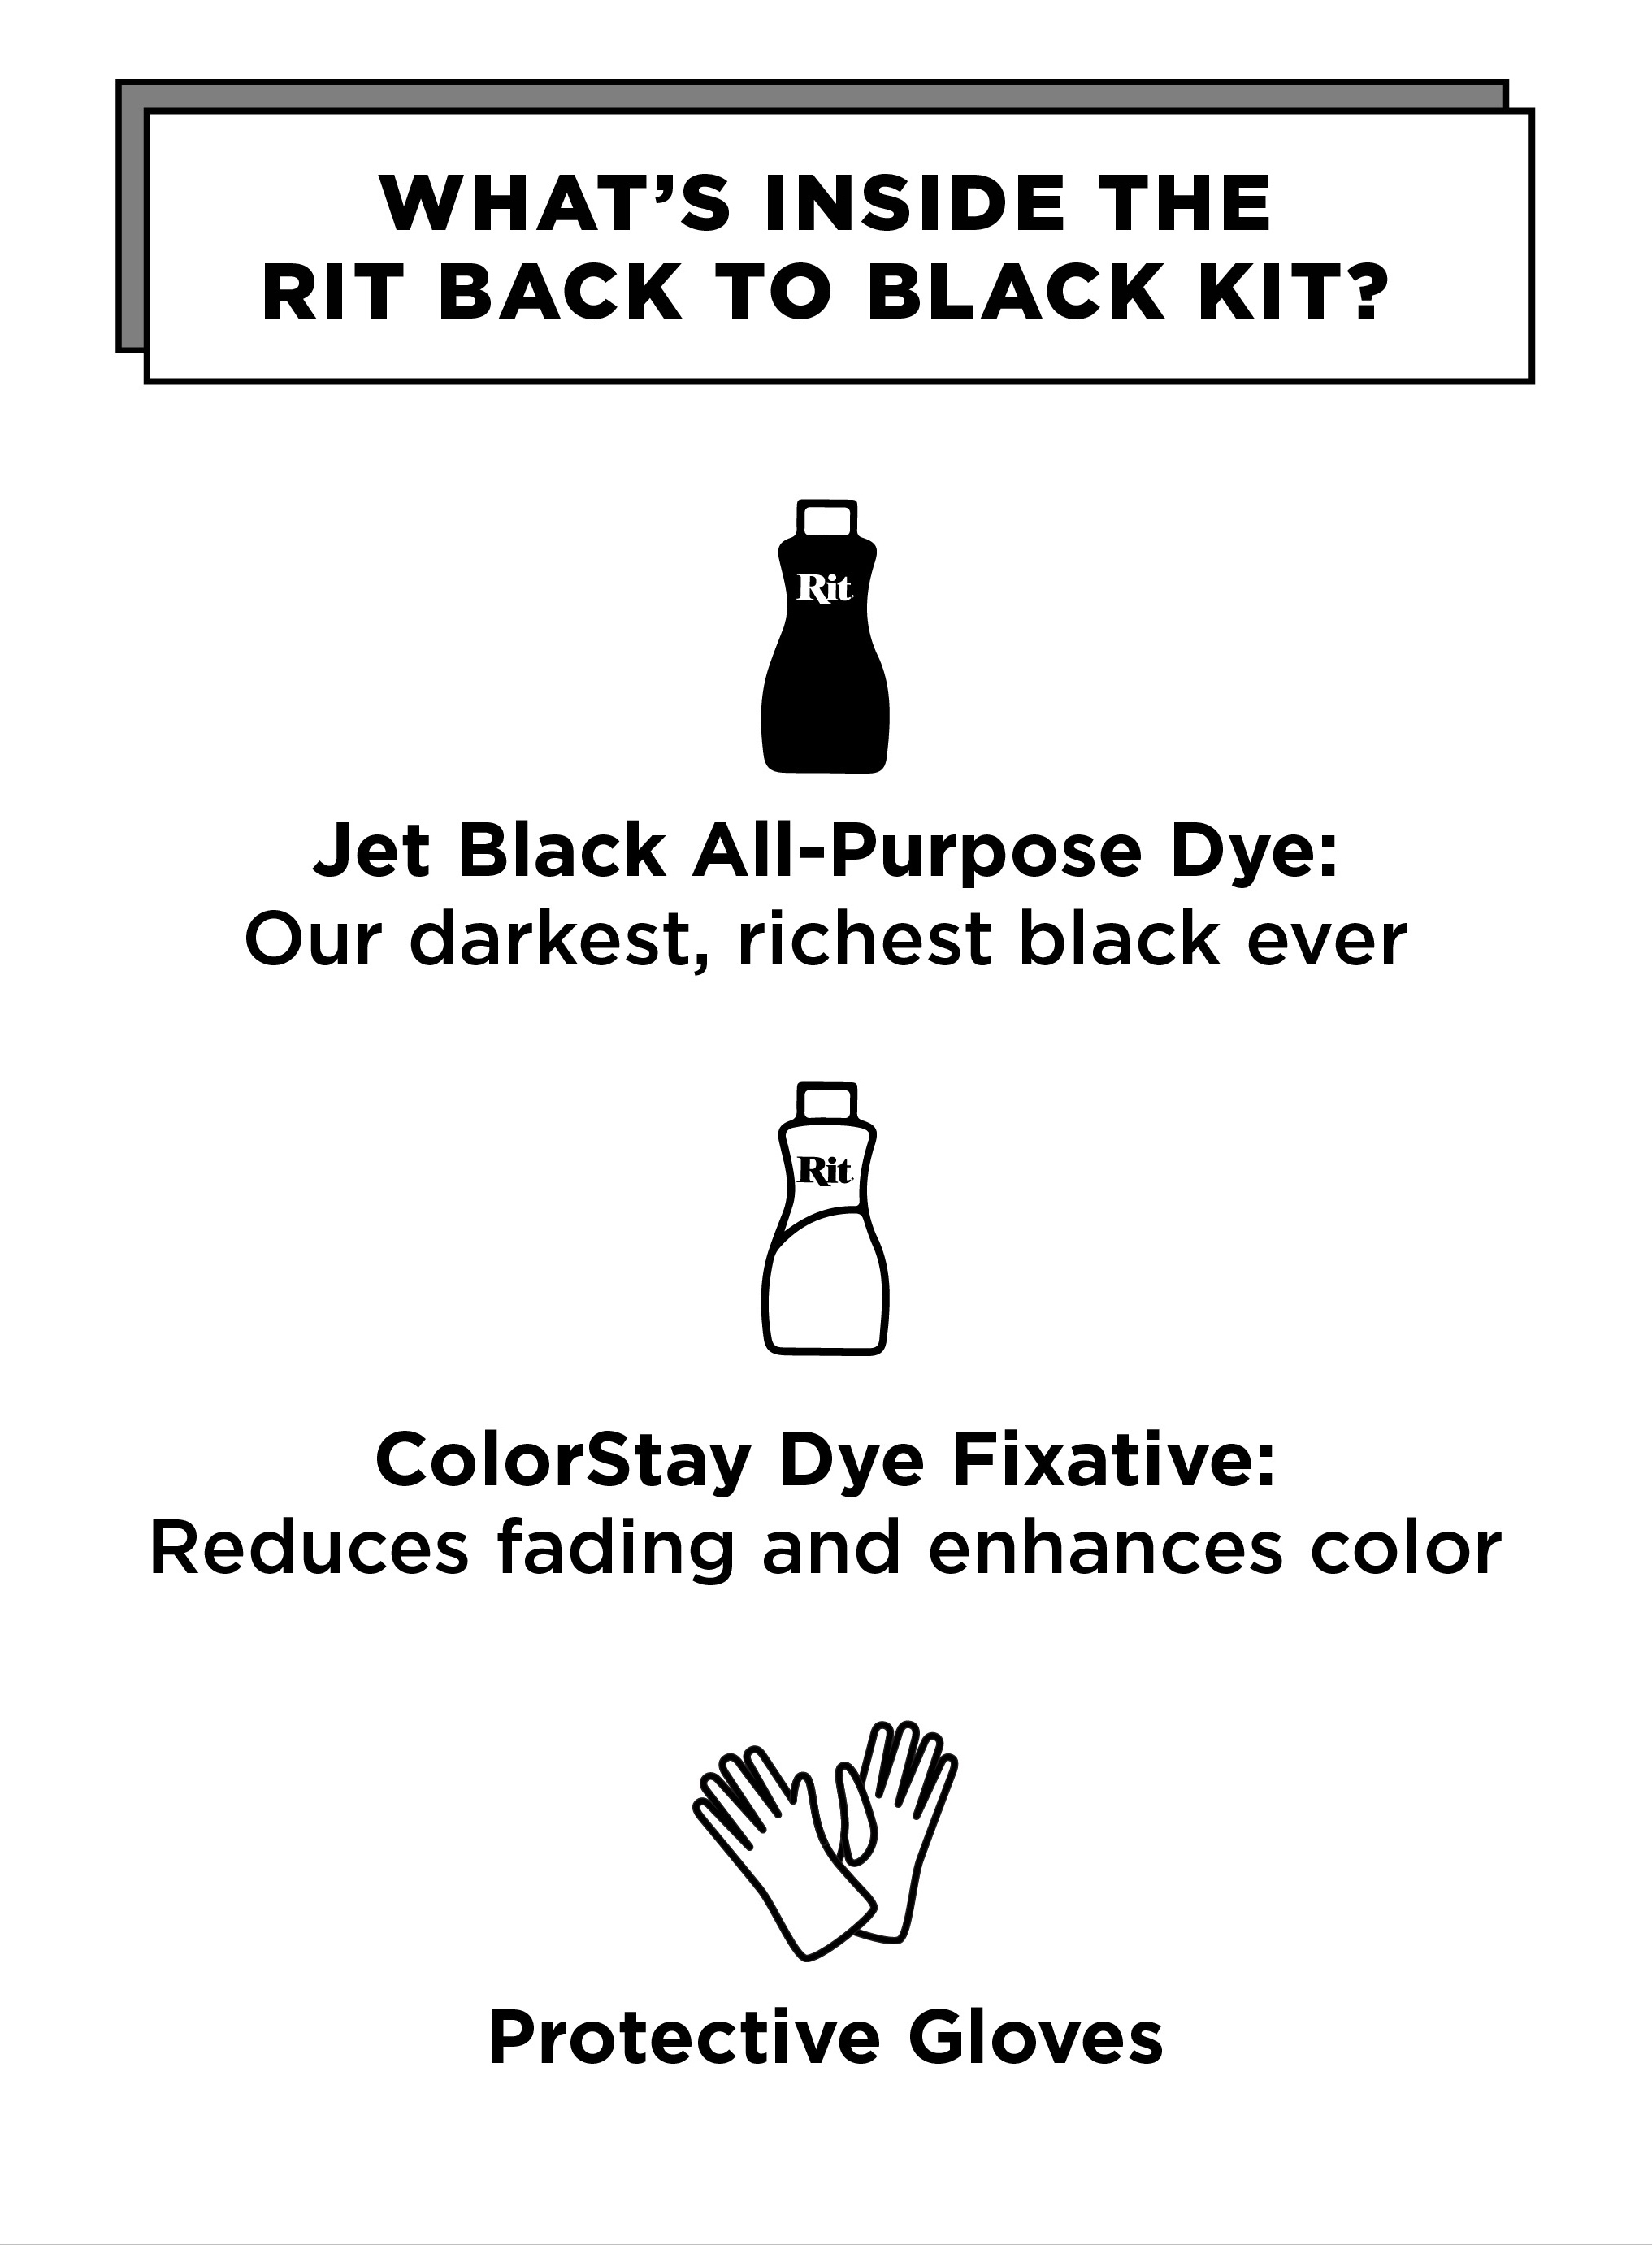 putting @ritdye's black and jet black to the test to see if they perfo, How To Use The Rit Dye Black